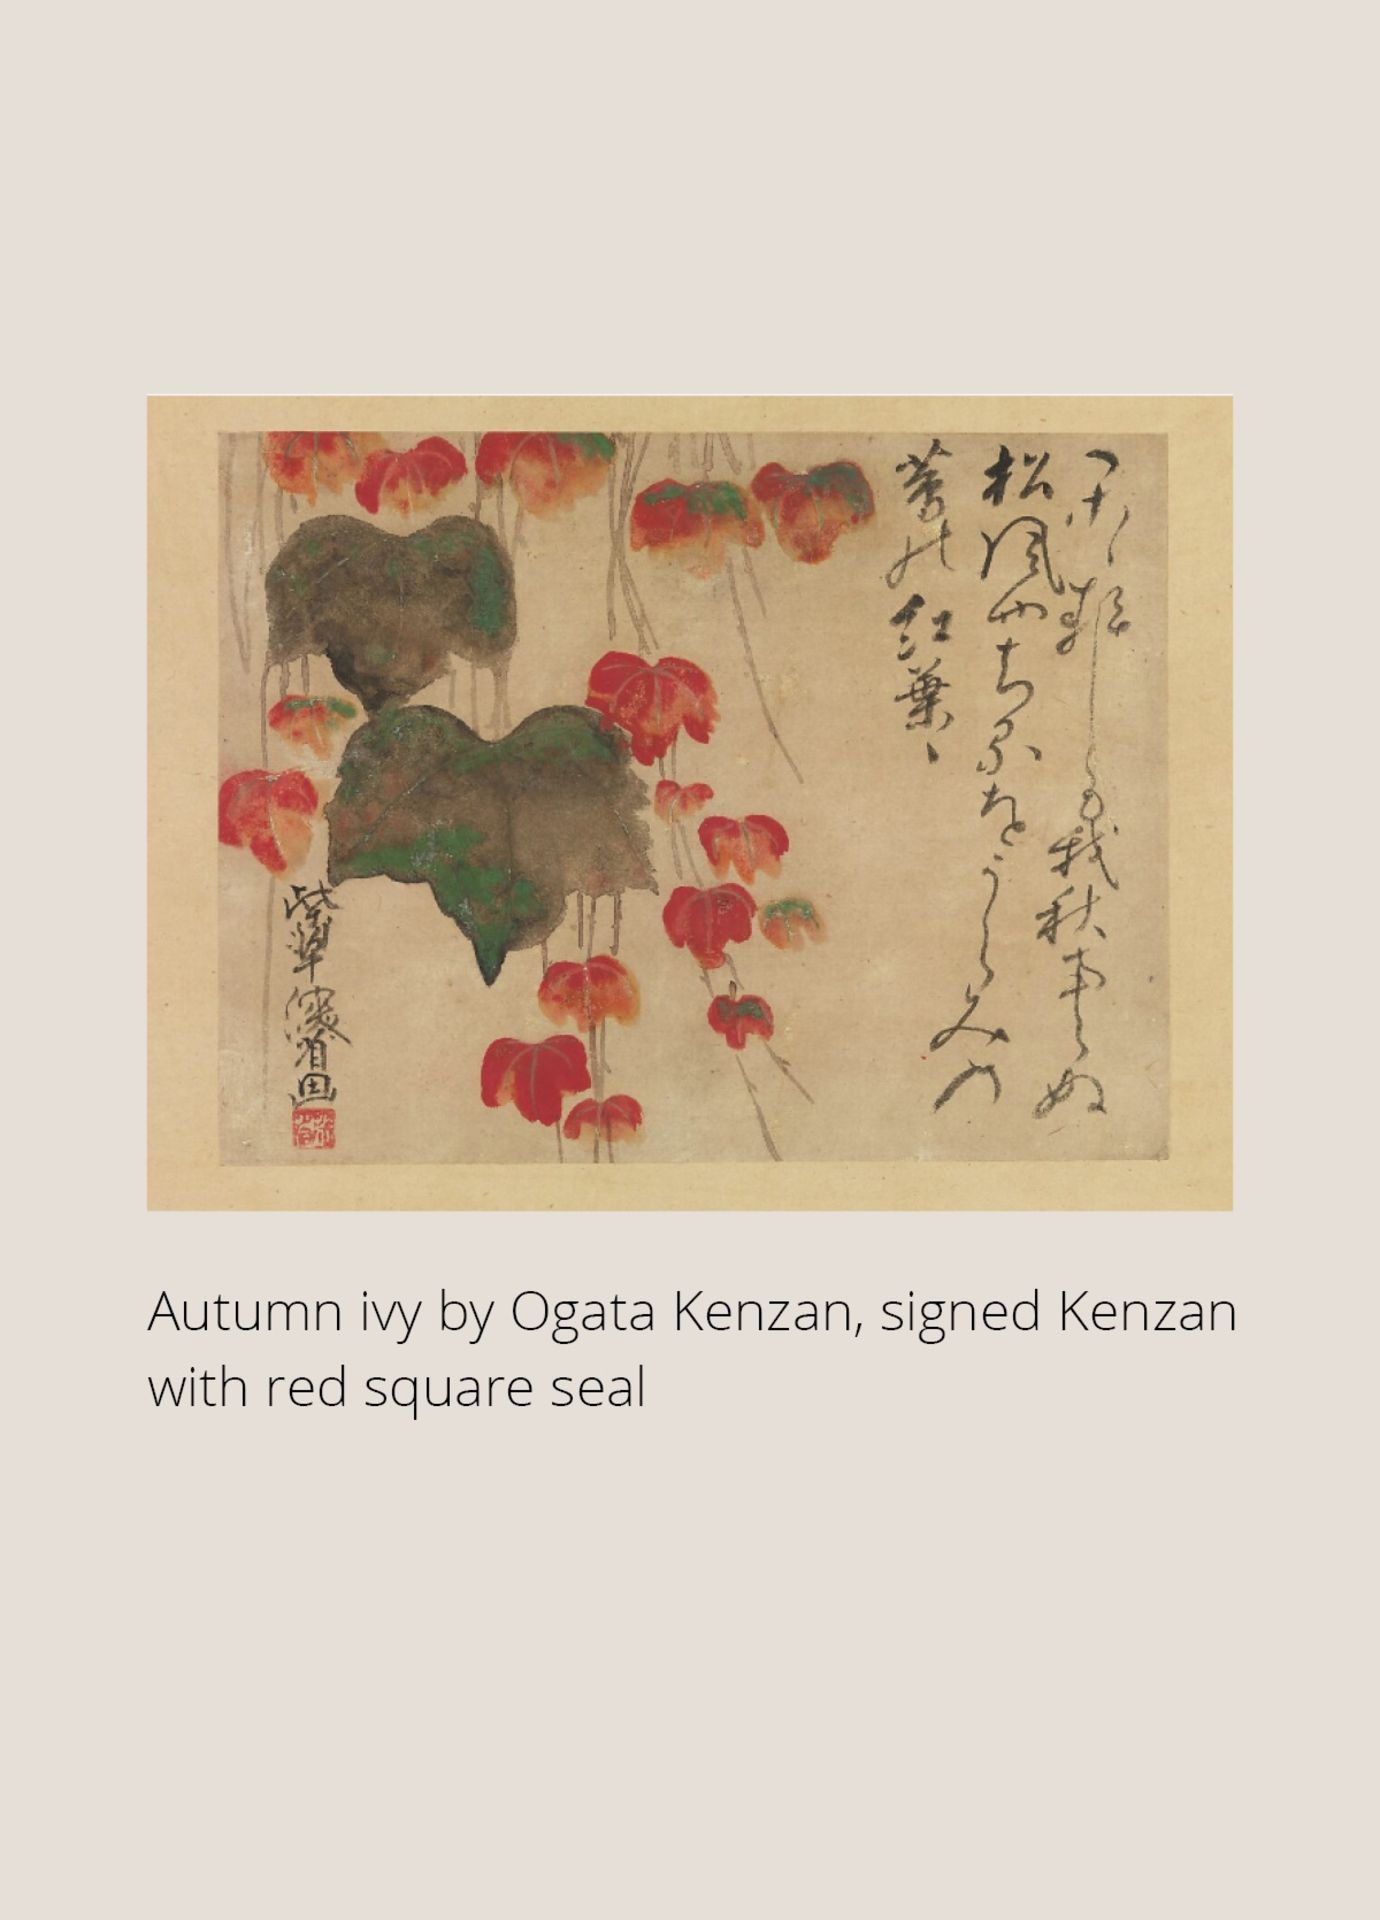 A FINE SATSUMA DISH WITH AN AUTUMNAL SCENE DEPICTING A DEER AND MOON, AFTER A DESIGN BY OGATA KENZAN - Image 5 of 6